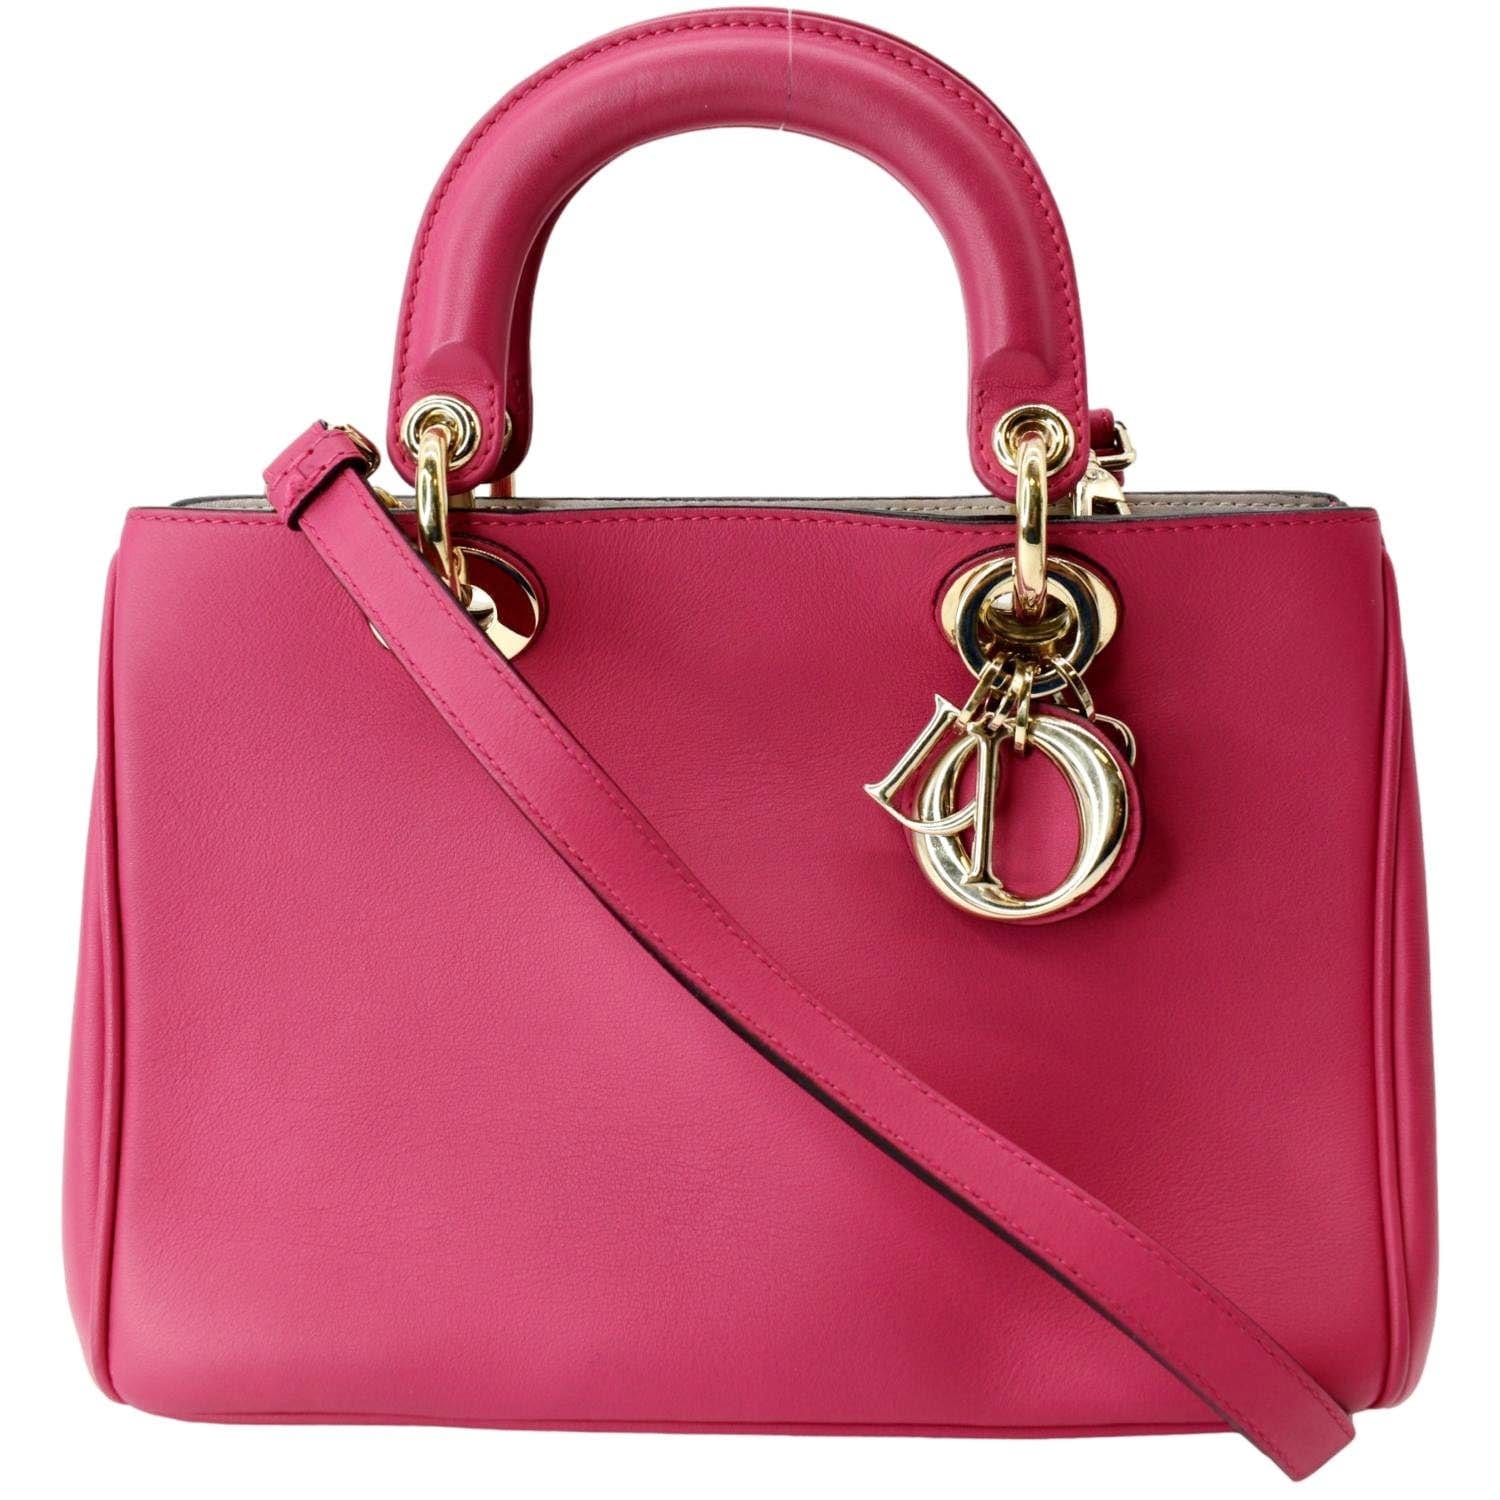 leather bag pink